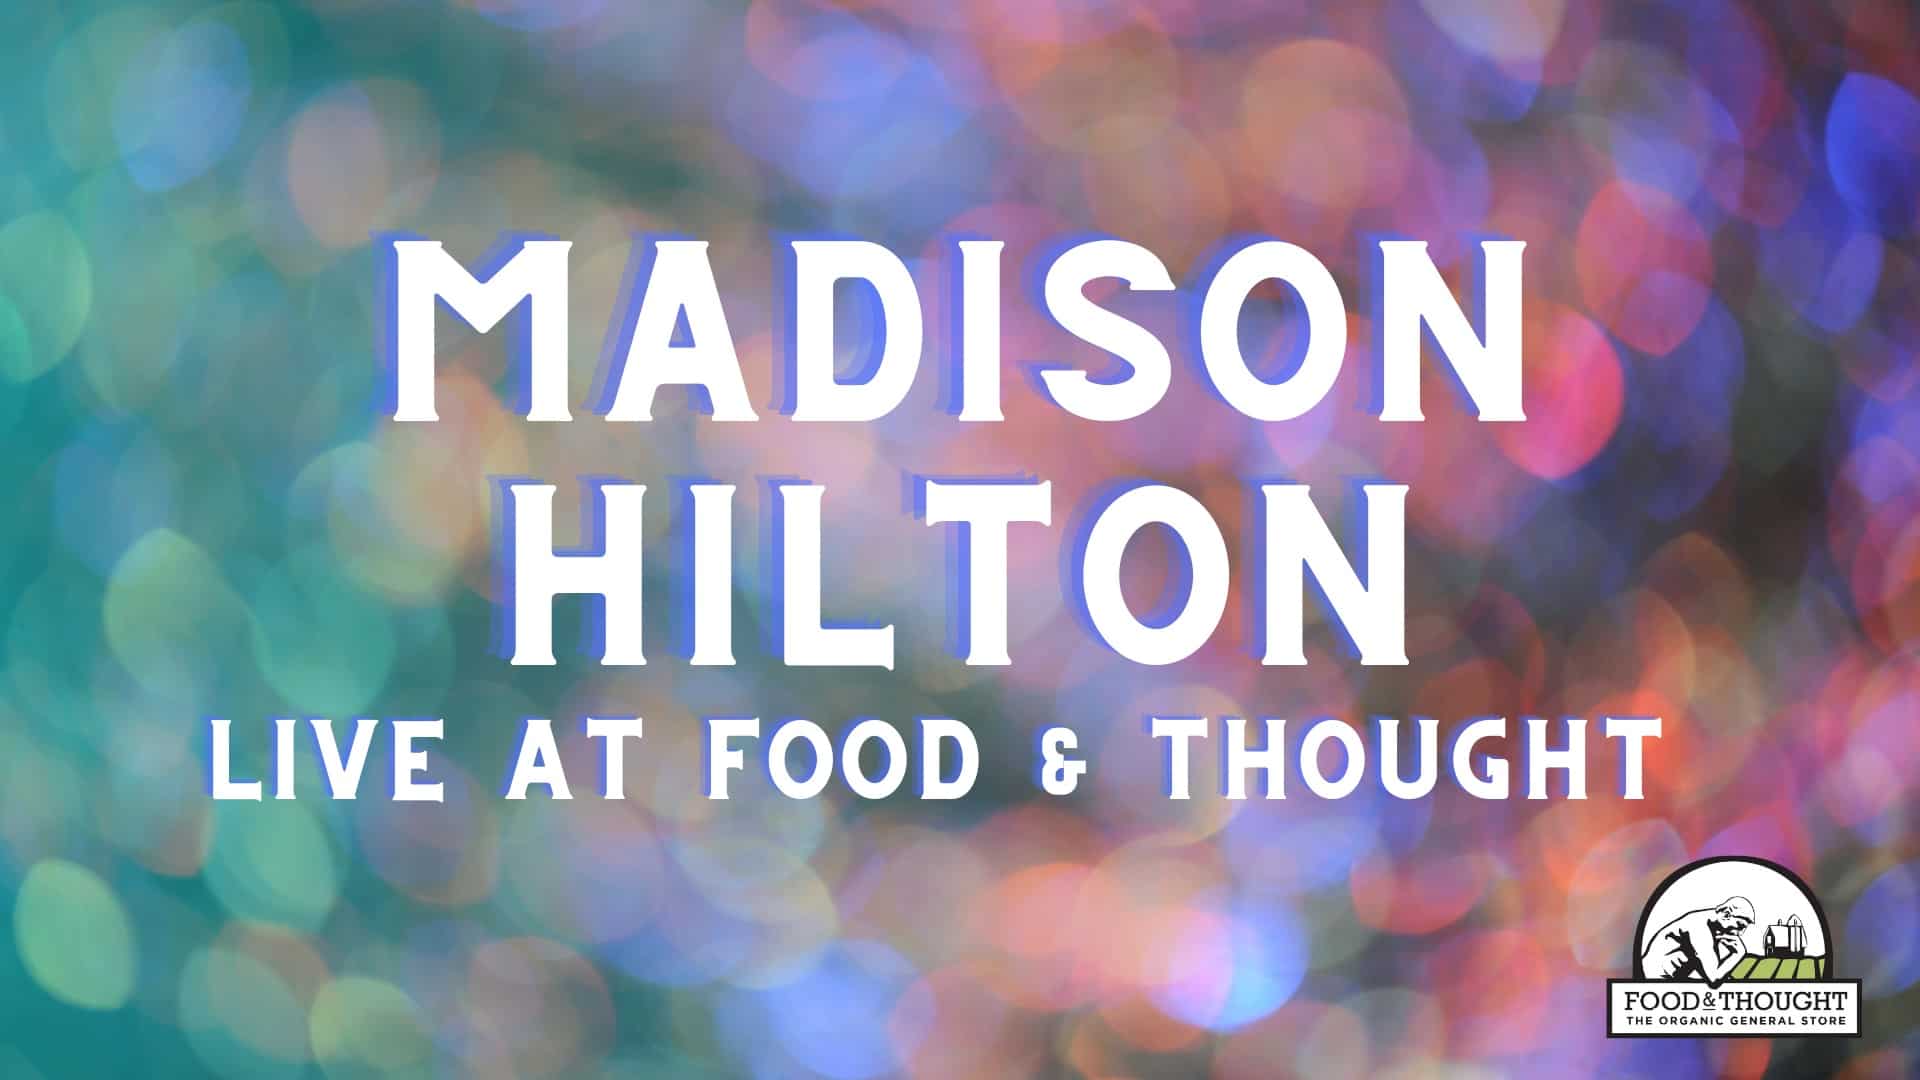 Madison Hilton Live at Food & Thought